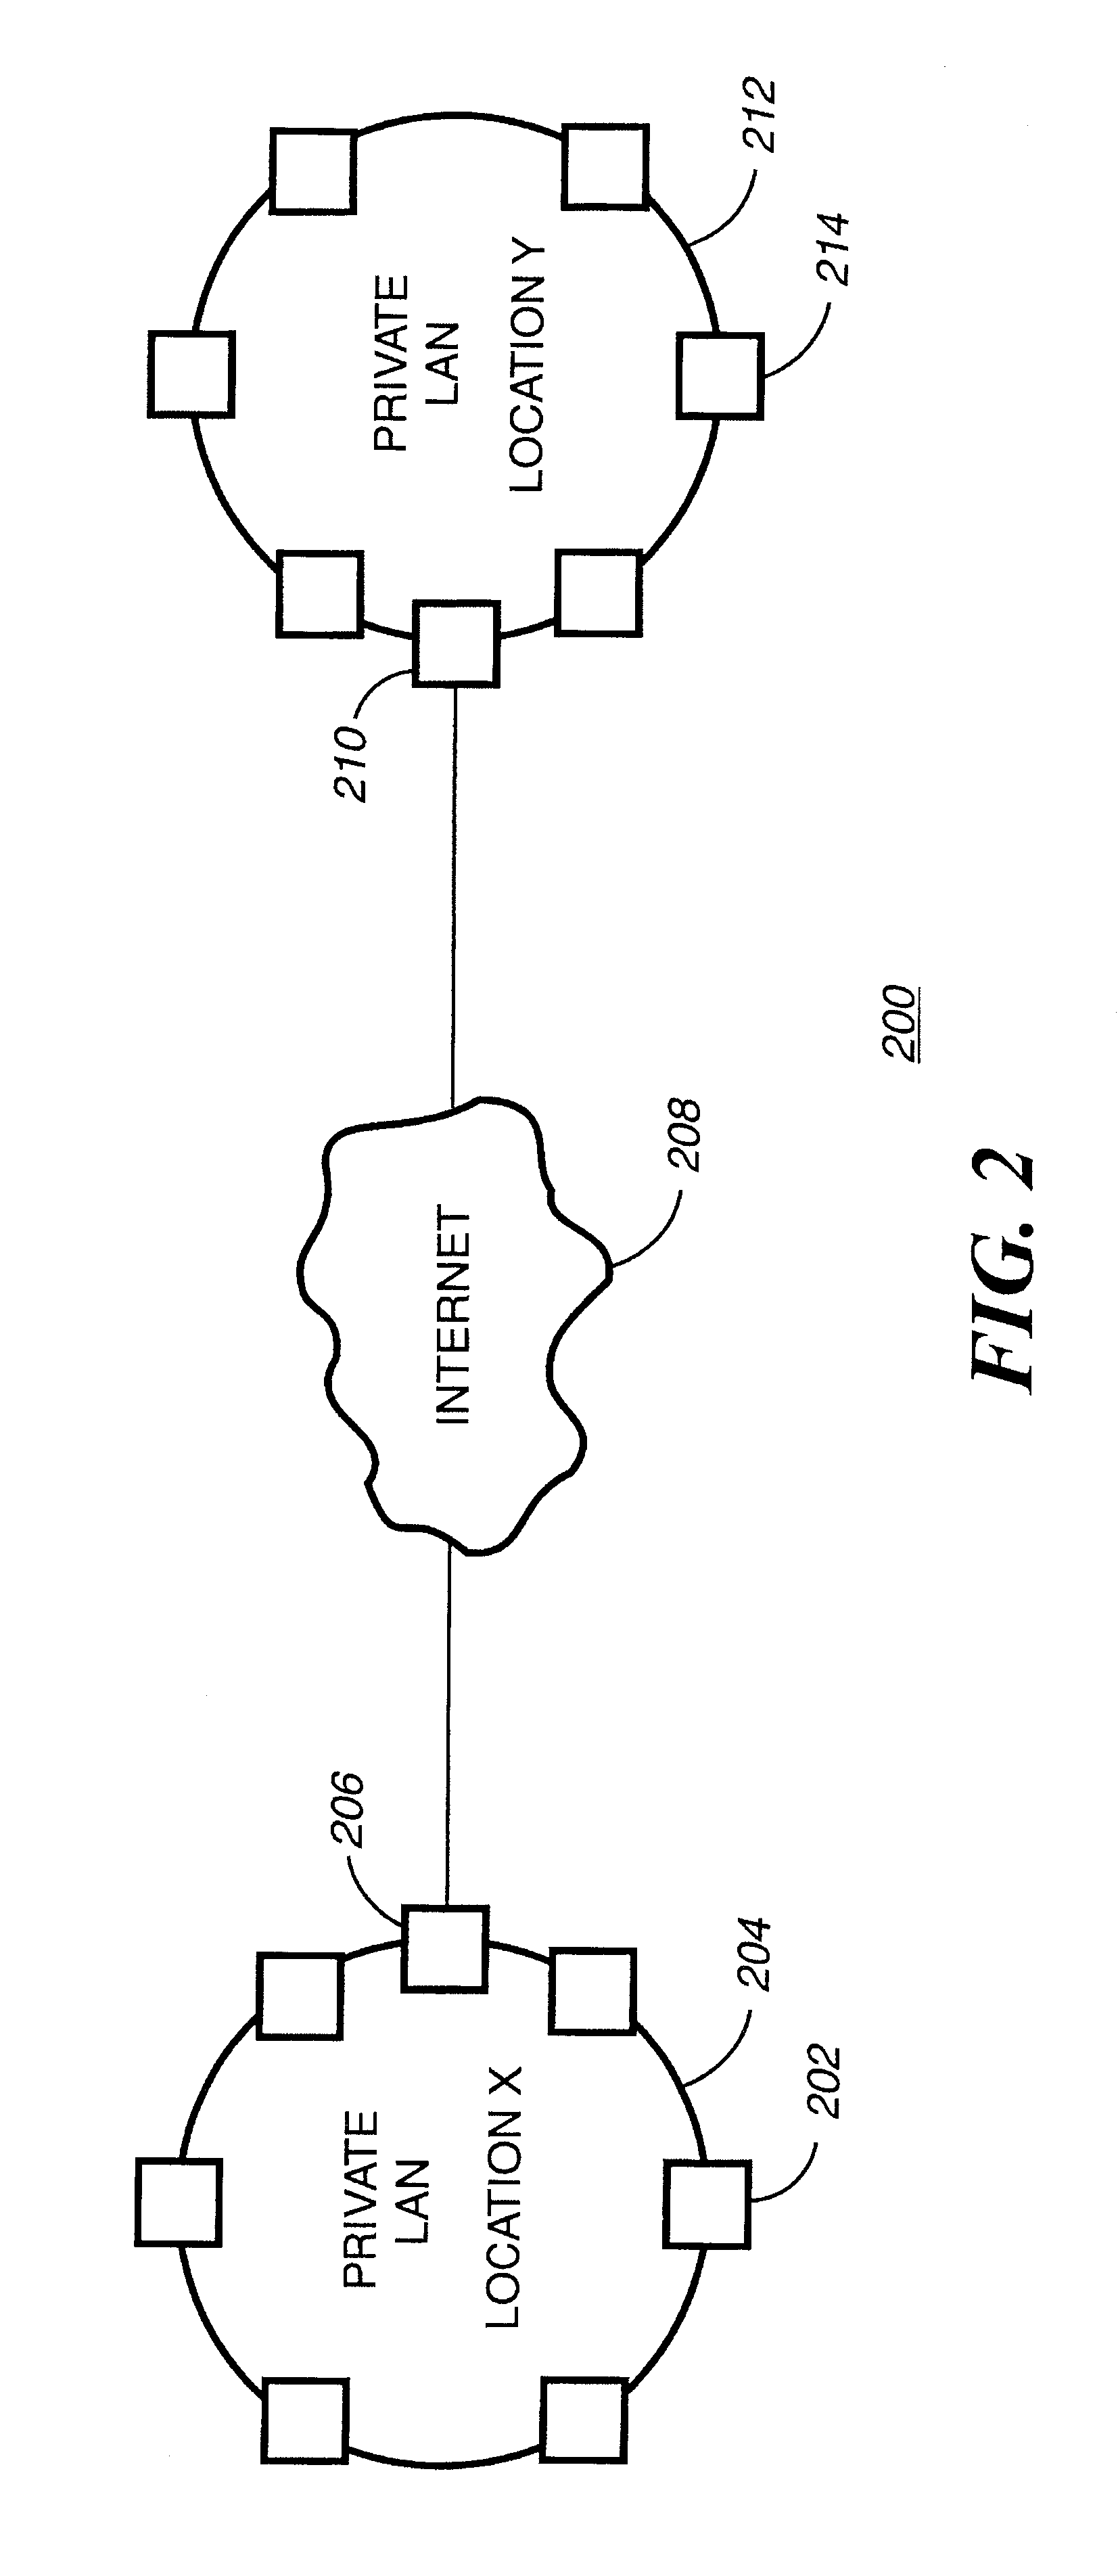 Method and apparatus for fault tolerant tunneling of multicast datagrams